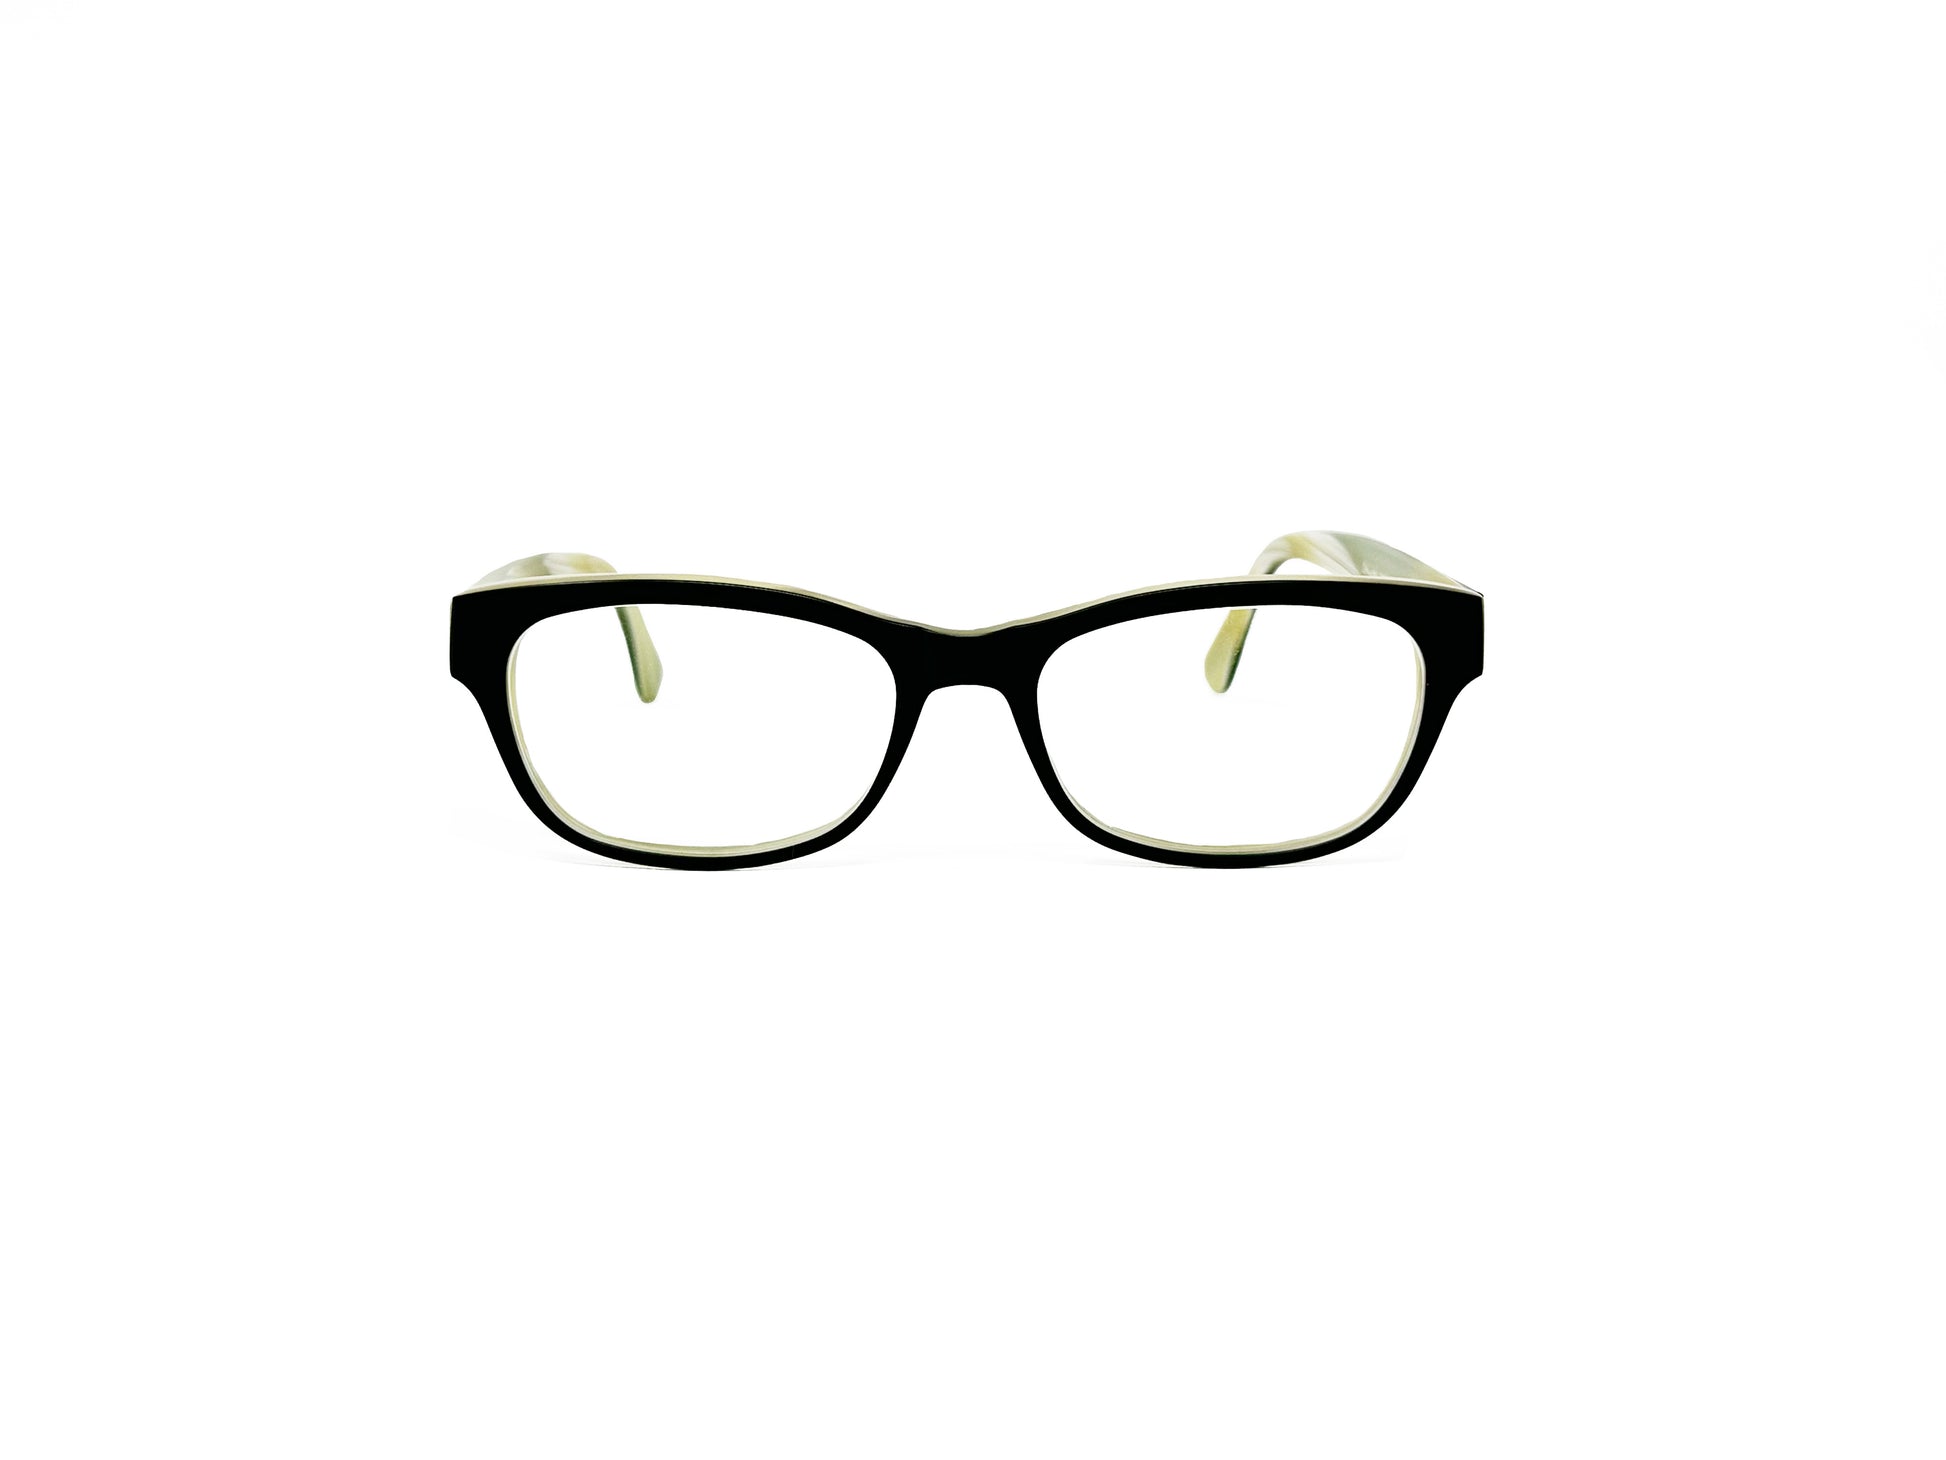 Schmnchel rectangular, uplifted, acetate optical frame. Model: 4537. Color: 1860M Black with cream swirl temples. Front view. 